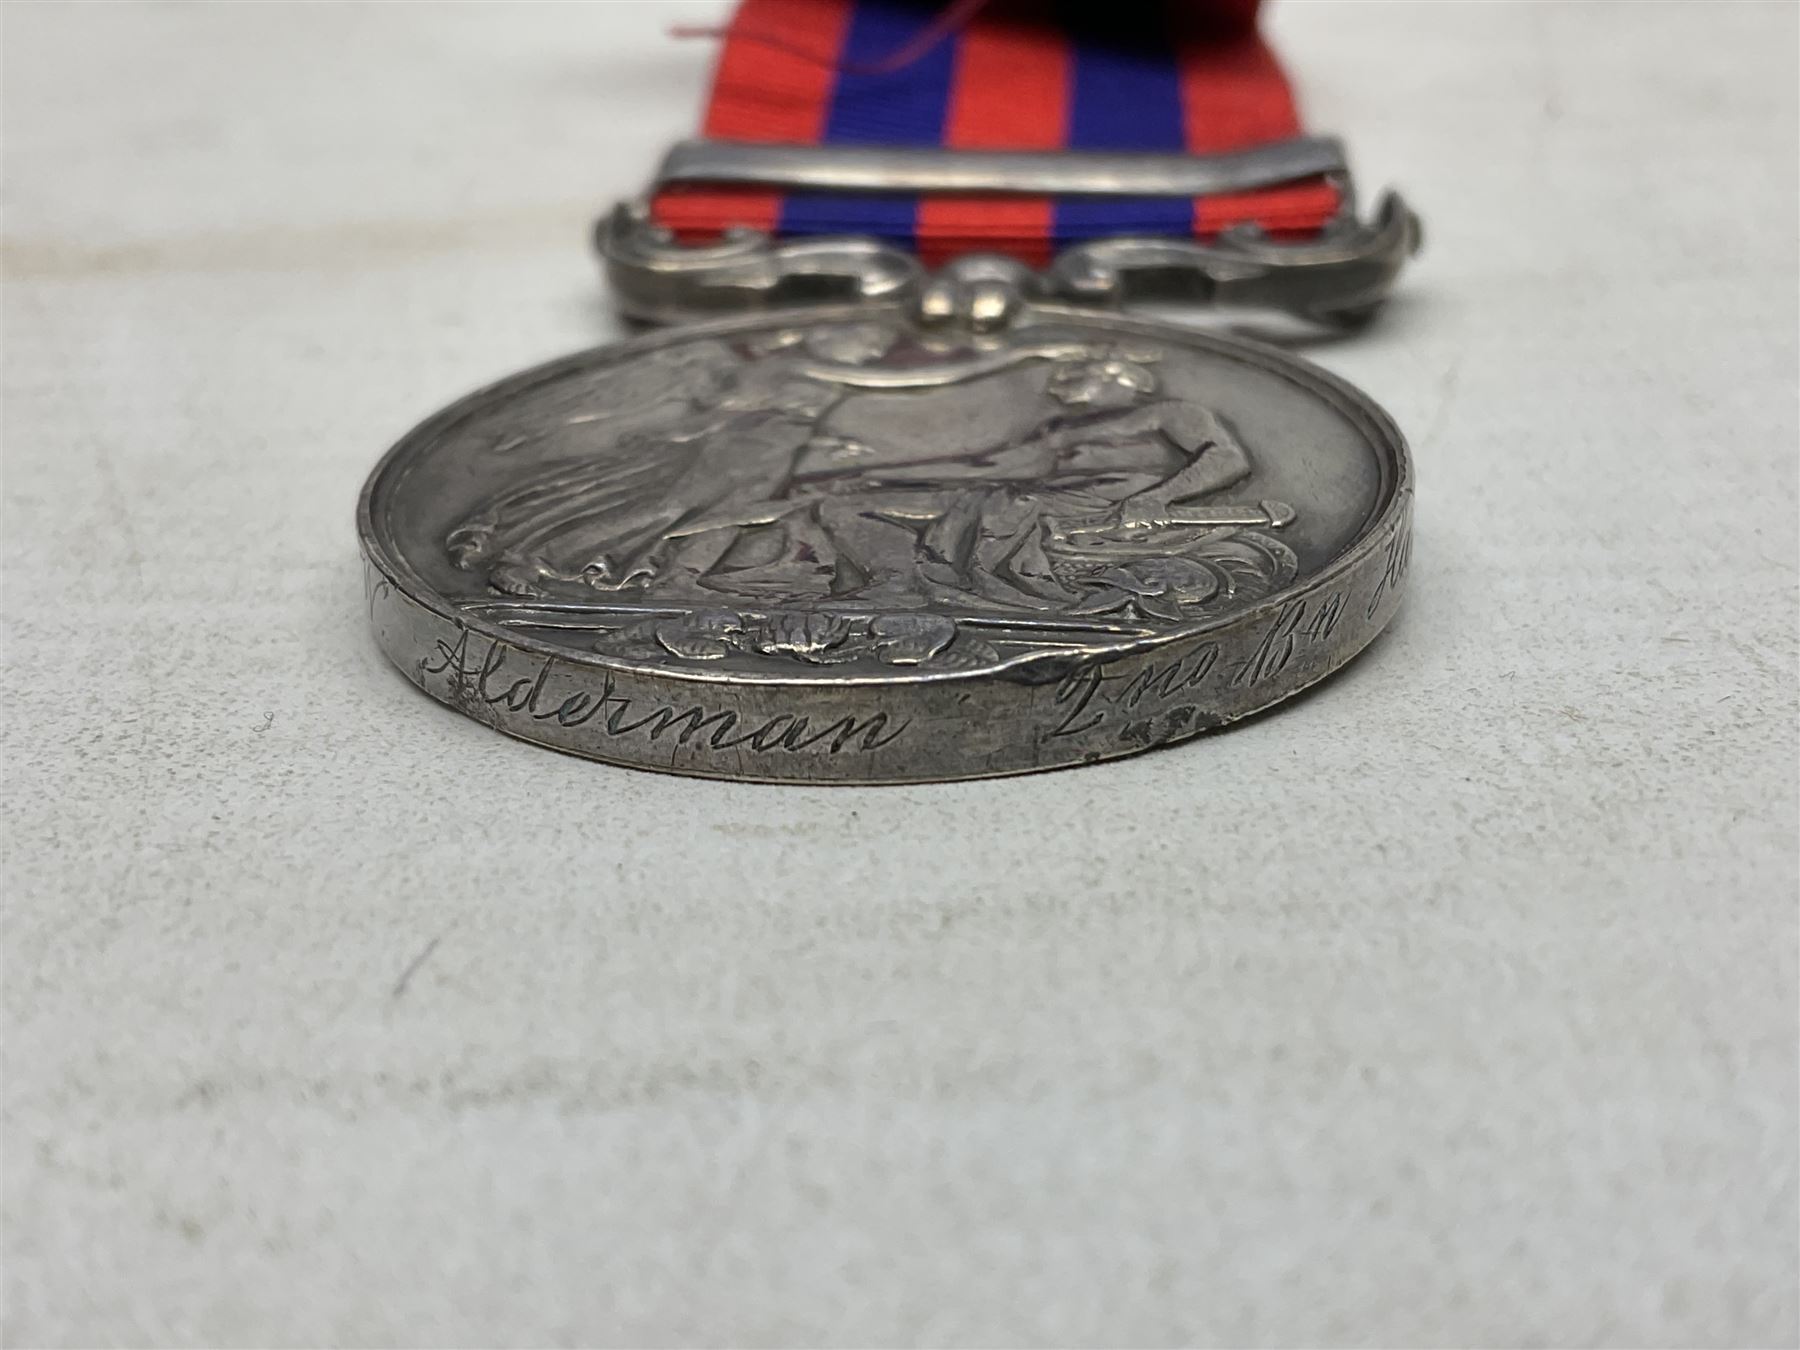 Victoria India General Service Medal with Burma 1885-7 clasp awarded to 1771 Pte. W. Alderman 2nd Bn - Image 9 of 10